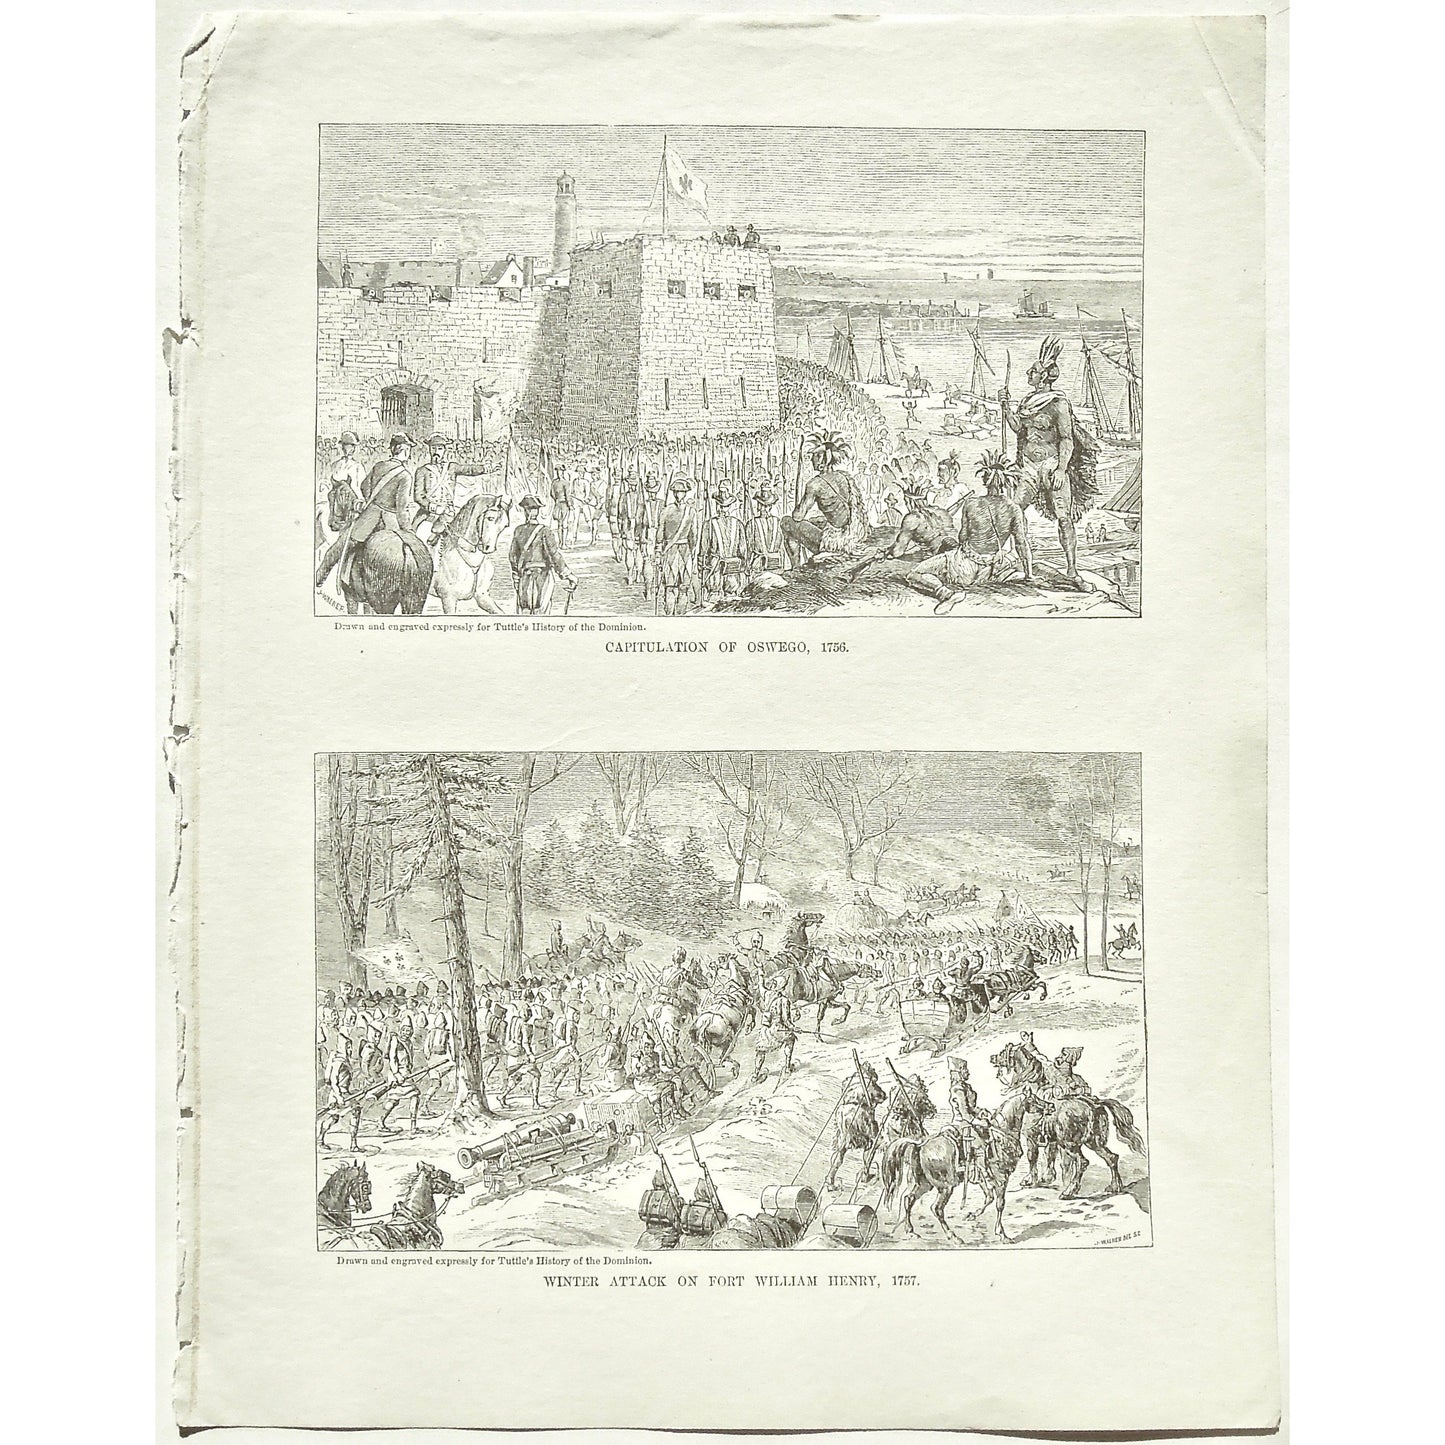 Capitulation of Oswego, 1756, Capitulation, Oswego, Winter Attack on Fort William Henry, Winter Attack, Attack, Fort William Henry, 1757, Fort, Natives, Soldiers, Troops, Cavalry, Weapons, Guns, War, Army, Formation, Canons, Swords, Sleds, Sleigh, Sleighs, Flag, Tuttle, Charles Tuttle, History of the Dominion, Popular History of the Dominion, Downie, Bigney, History, Dominion, Canada, Canadian History, Antique, Antique Print, Steel Engraving, Engraving, Prints, Printmaking, Original, Rare prints, rare books